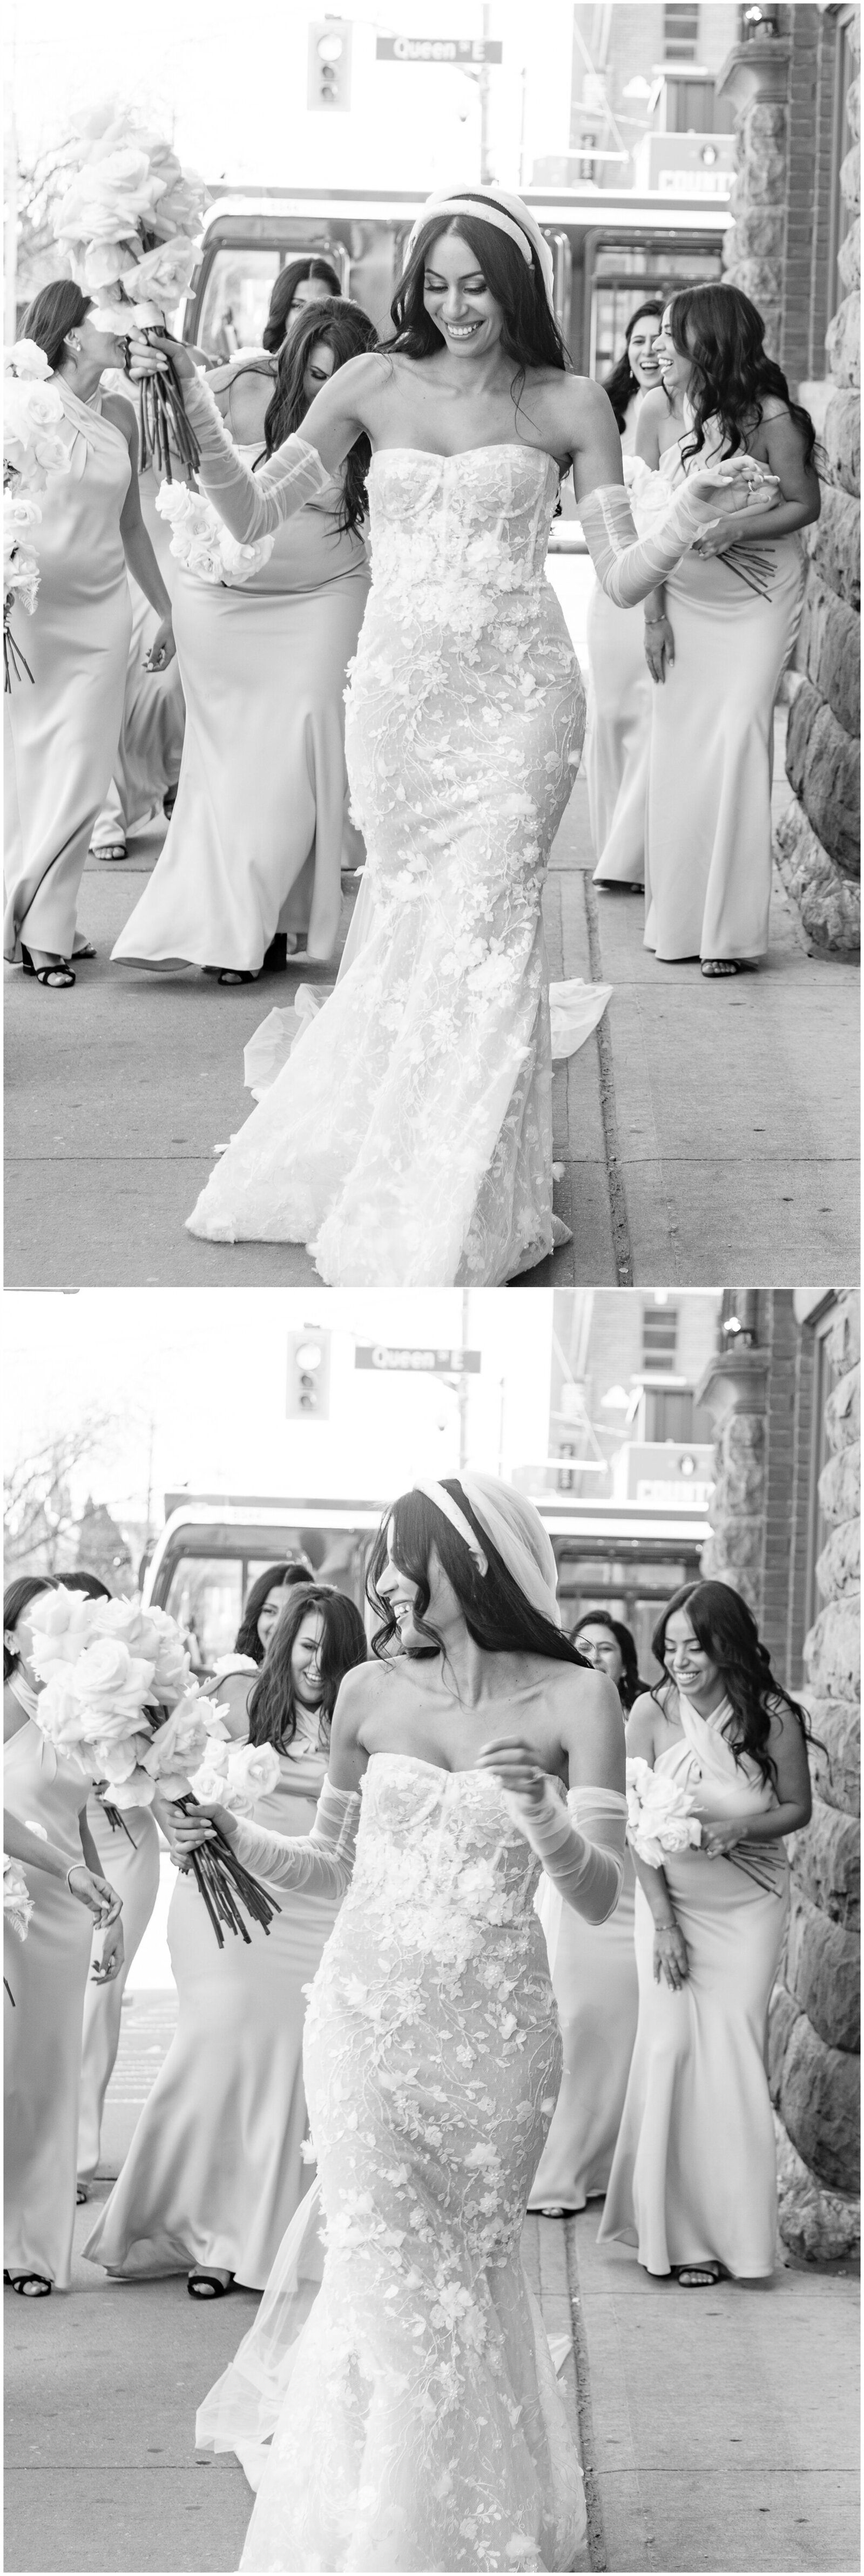 Bride with her bridesmaids on Toronto streets - The bride wears a headband with her long hair down matching with her sheer detachable sleeves and sheath silhouette dress with floral bridal lace